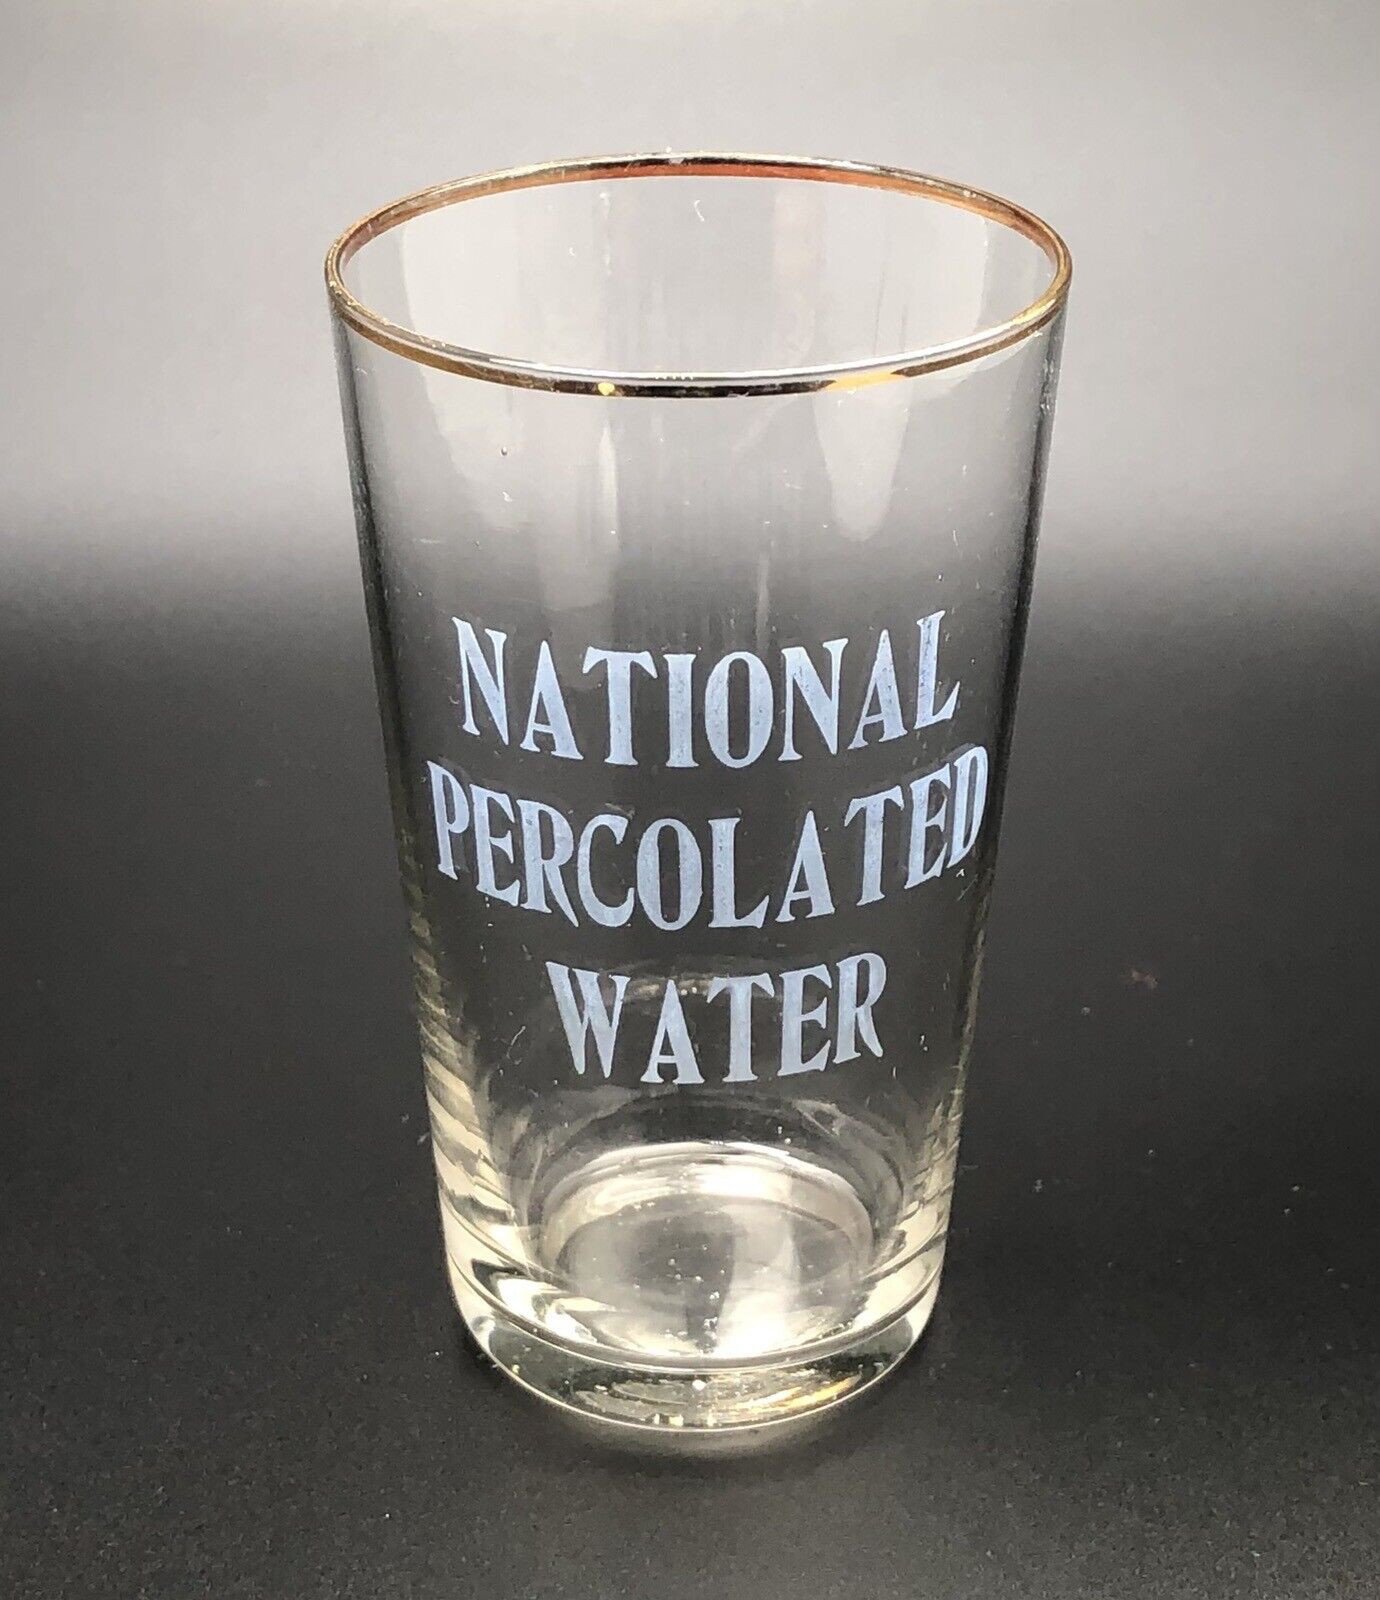 National Percolated Water Soda Fountain Glass / Vtg Acid Etched Bar Advertising